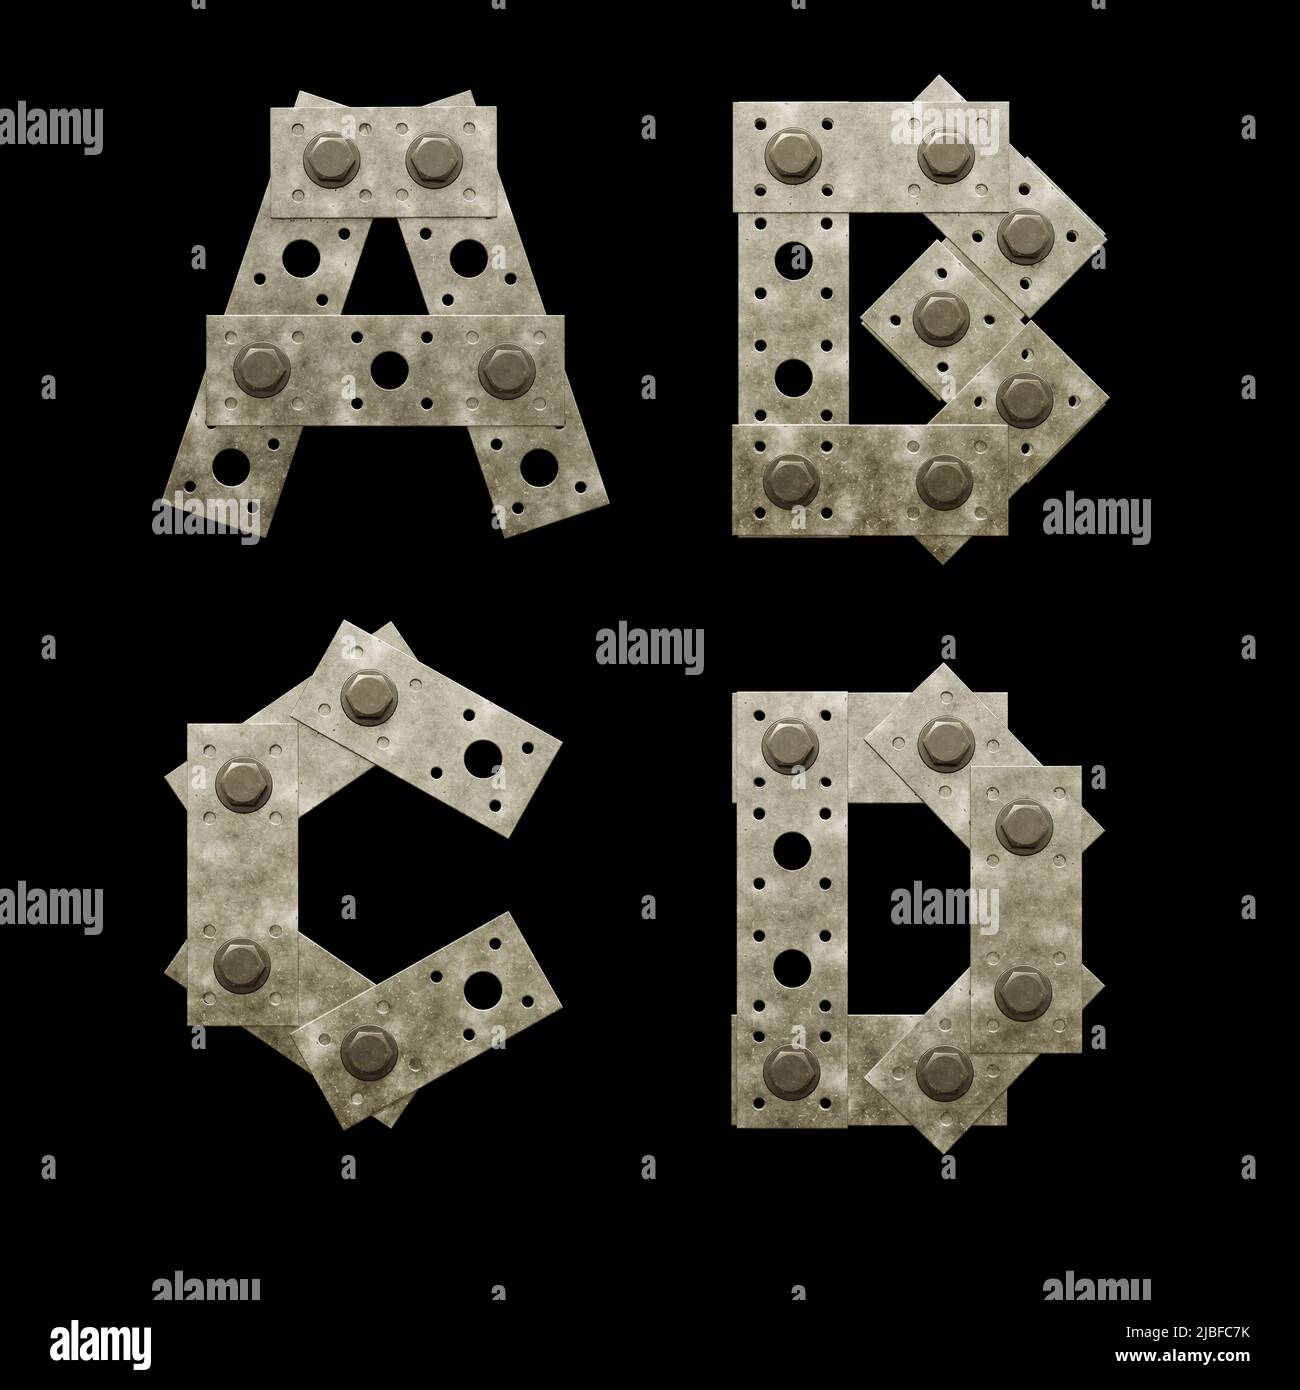 3d rendering of metal fixing plate capital letter alphabet - letters A-D Stock Photo